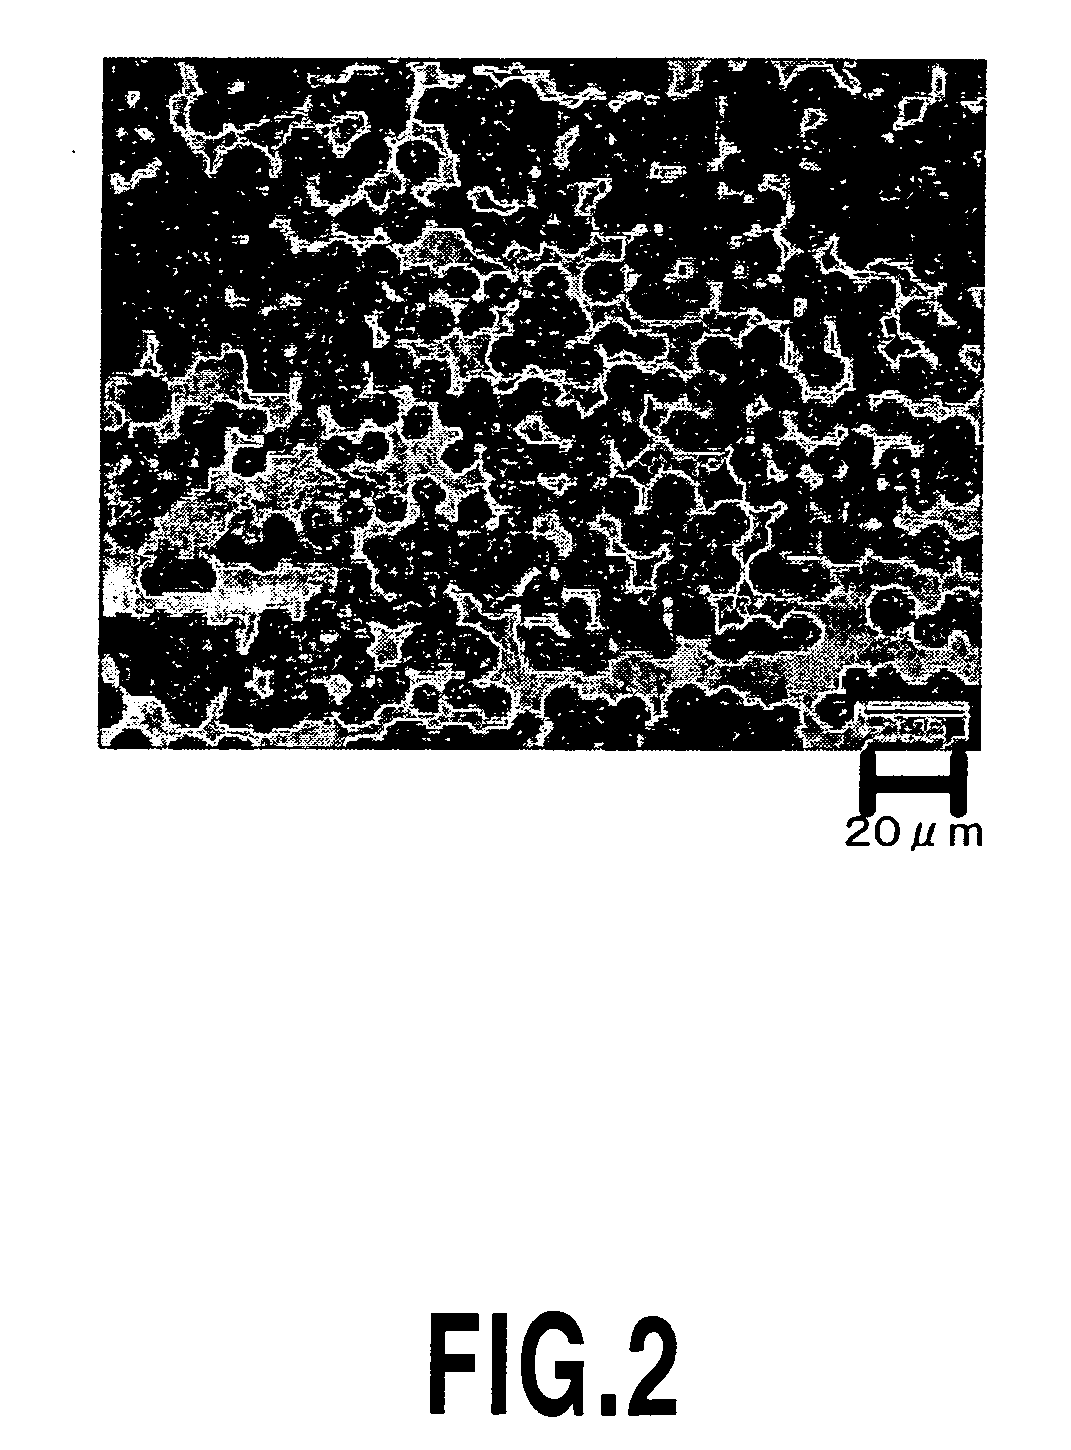 Metal-based carbon fiber composite material and method for producing the same